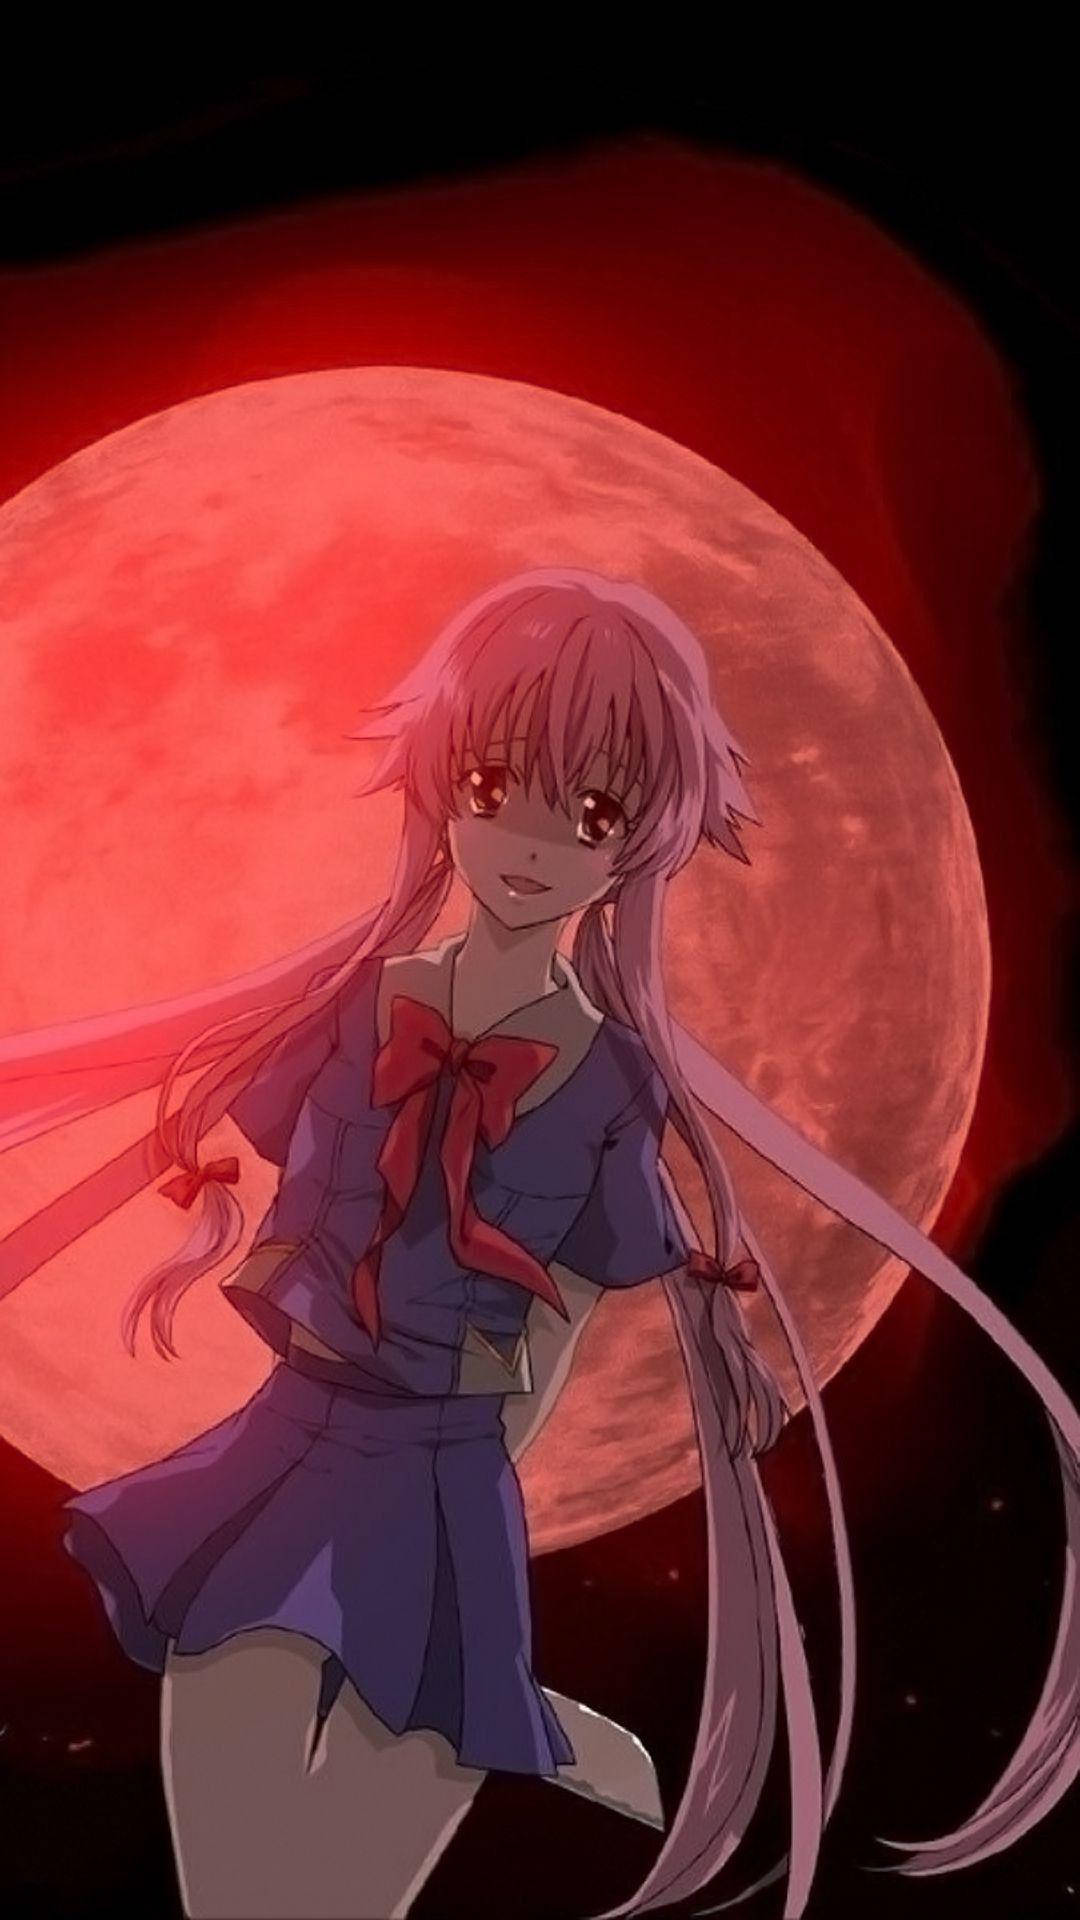 Future Diary With A Full Moon